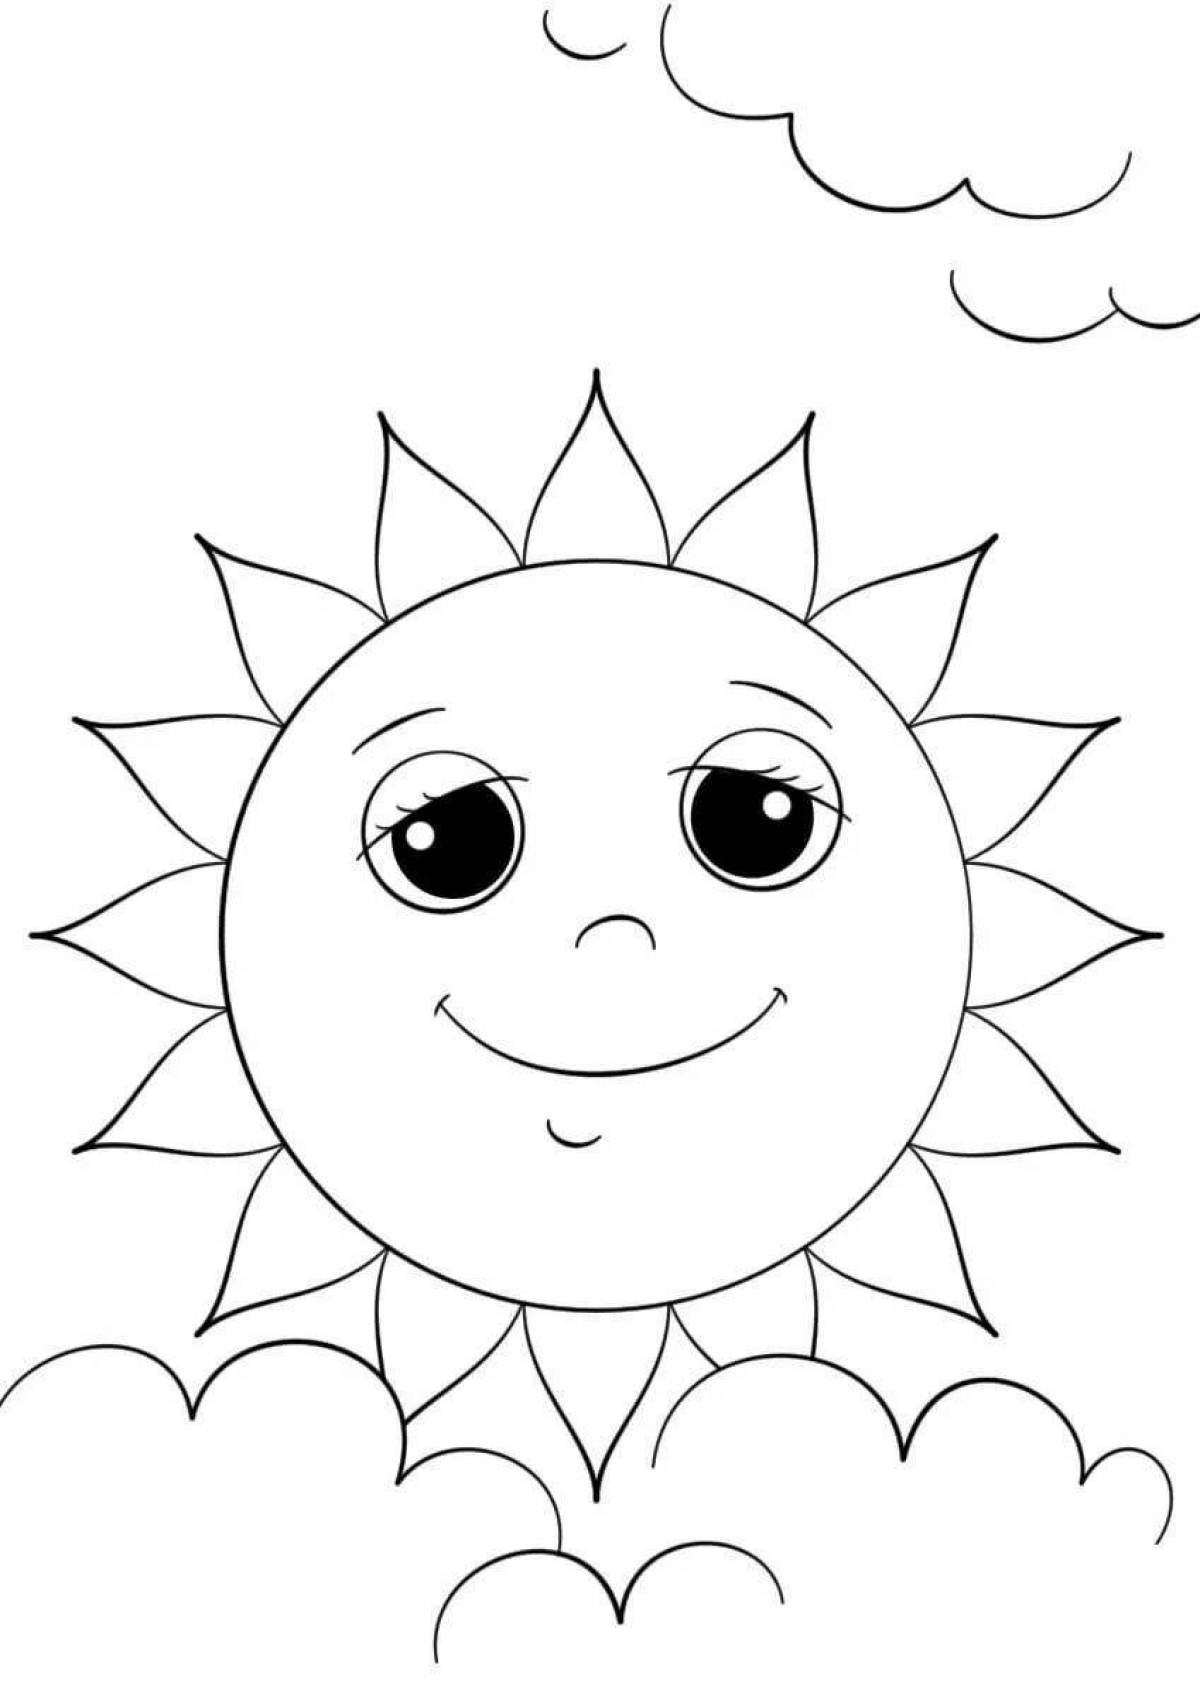 Magic coloring sun for children 4-5 years old